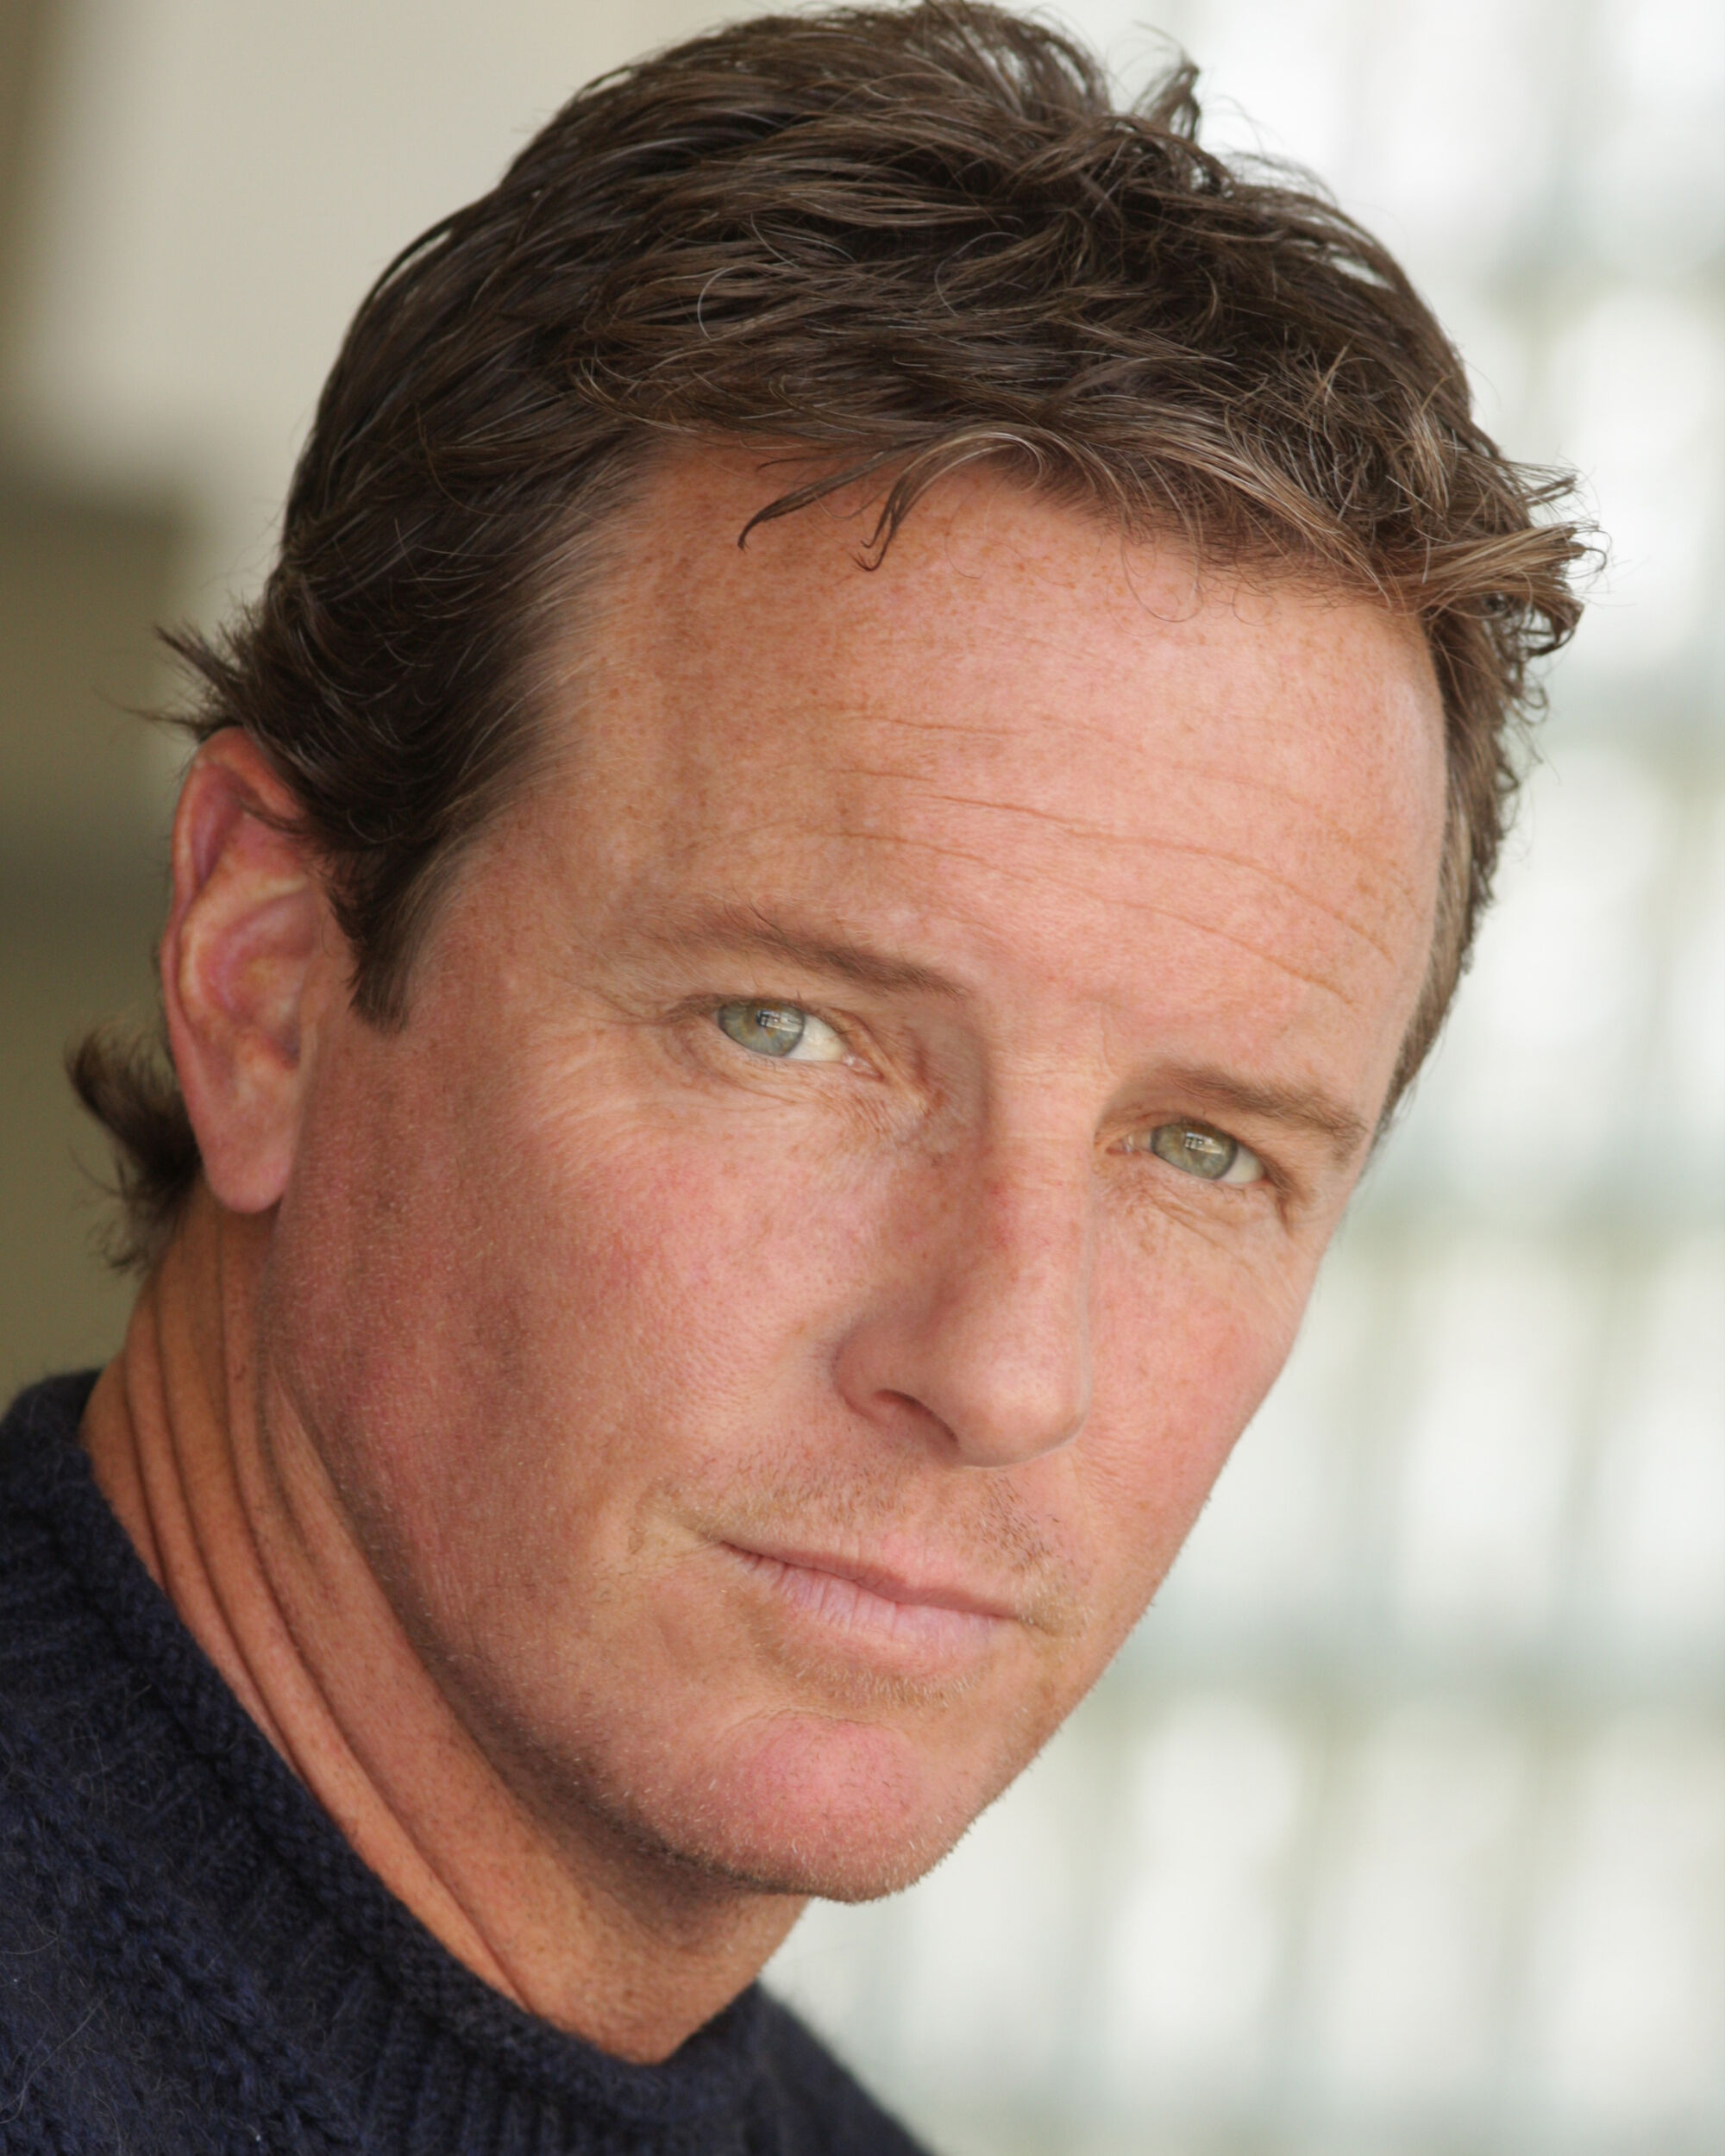 Linden ashby dating history